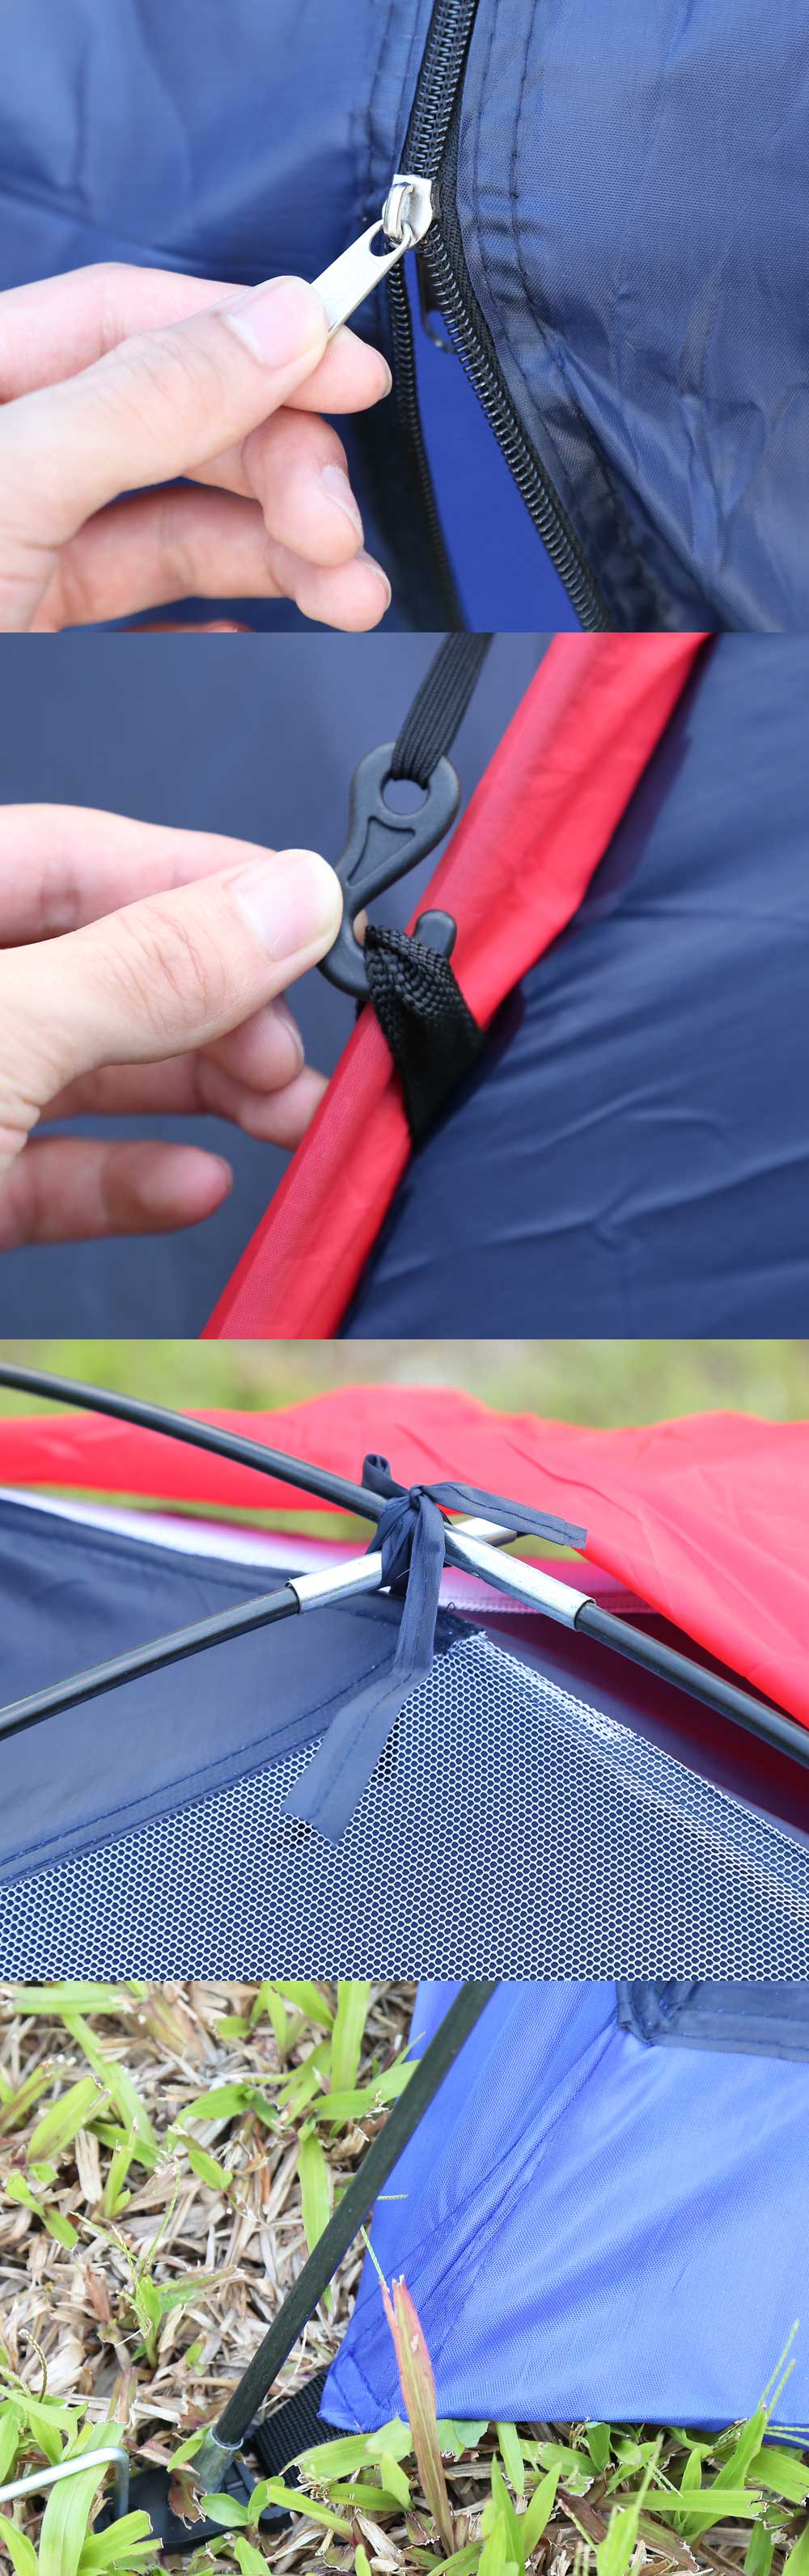 Outdoor Camping Polyester Fiber Tent Fiberglass Pole for Two Persons with Bag for Picnic Travel Hiking Adventure